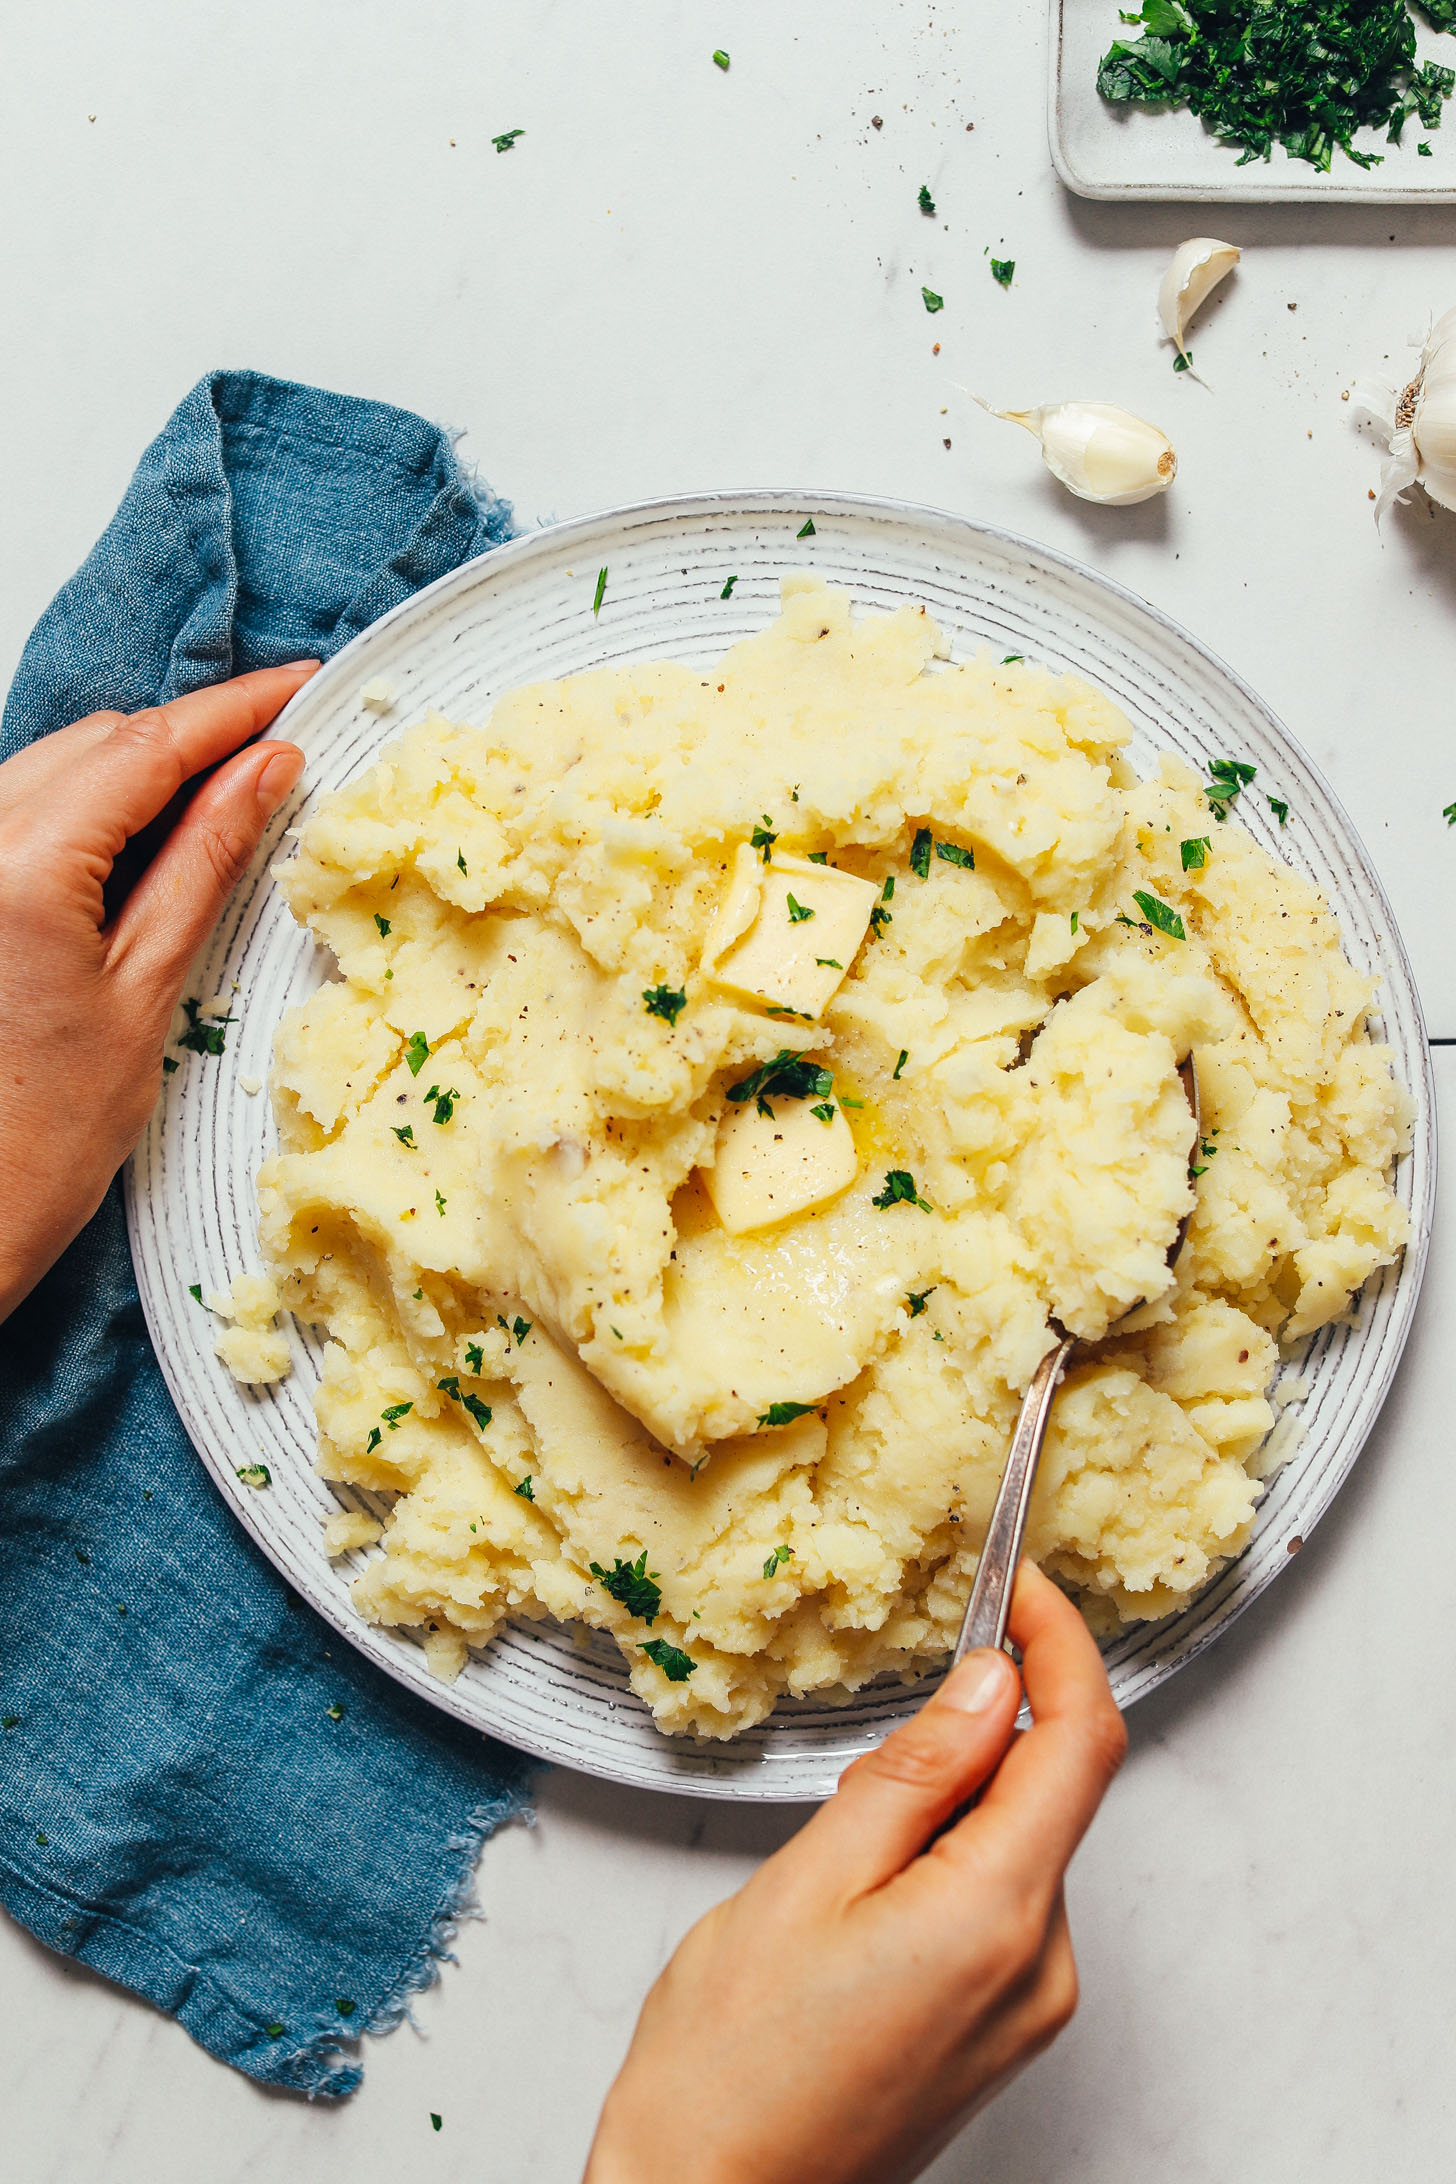 Plate of delicious Vegan Mashed Potatoes for an easy Thanksgiving side